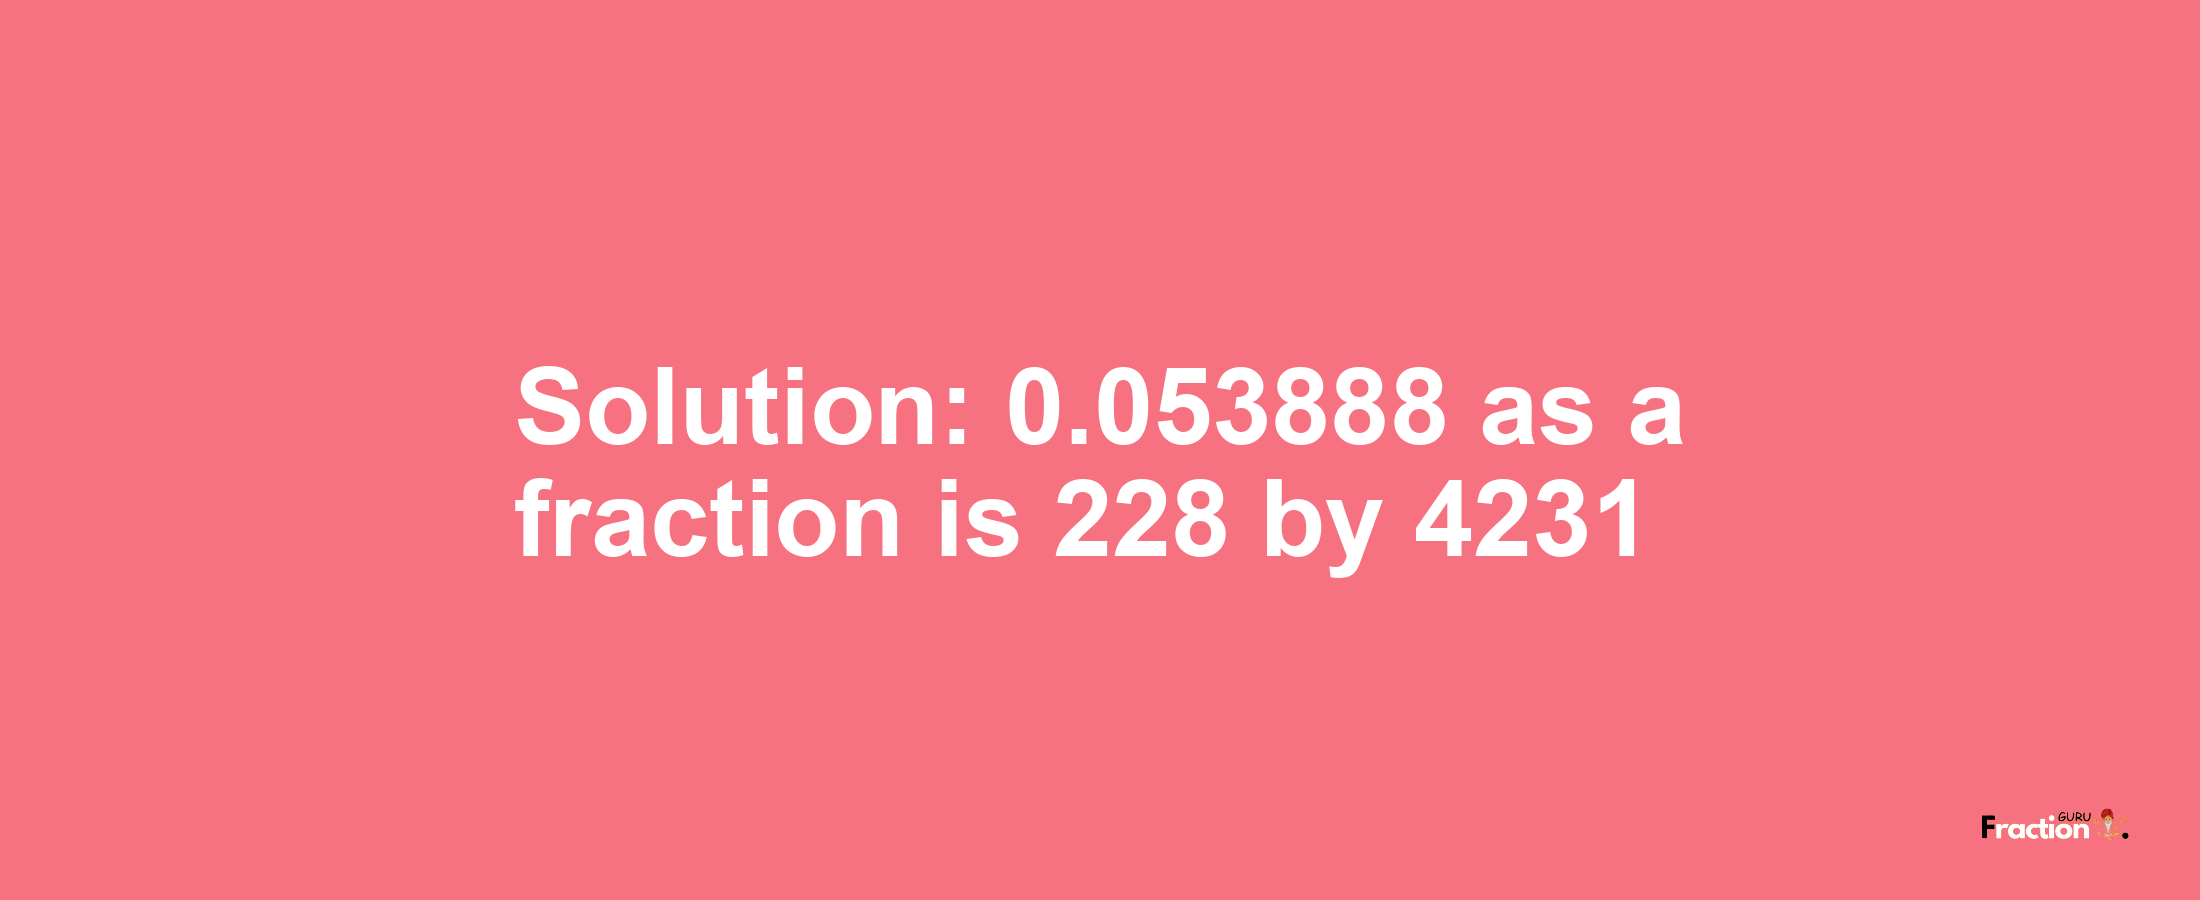 Solution:0.053888 as a fraction is 228/4231